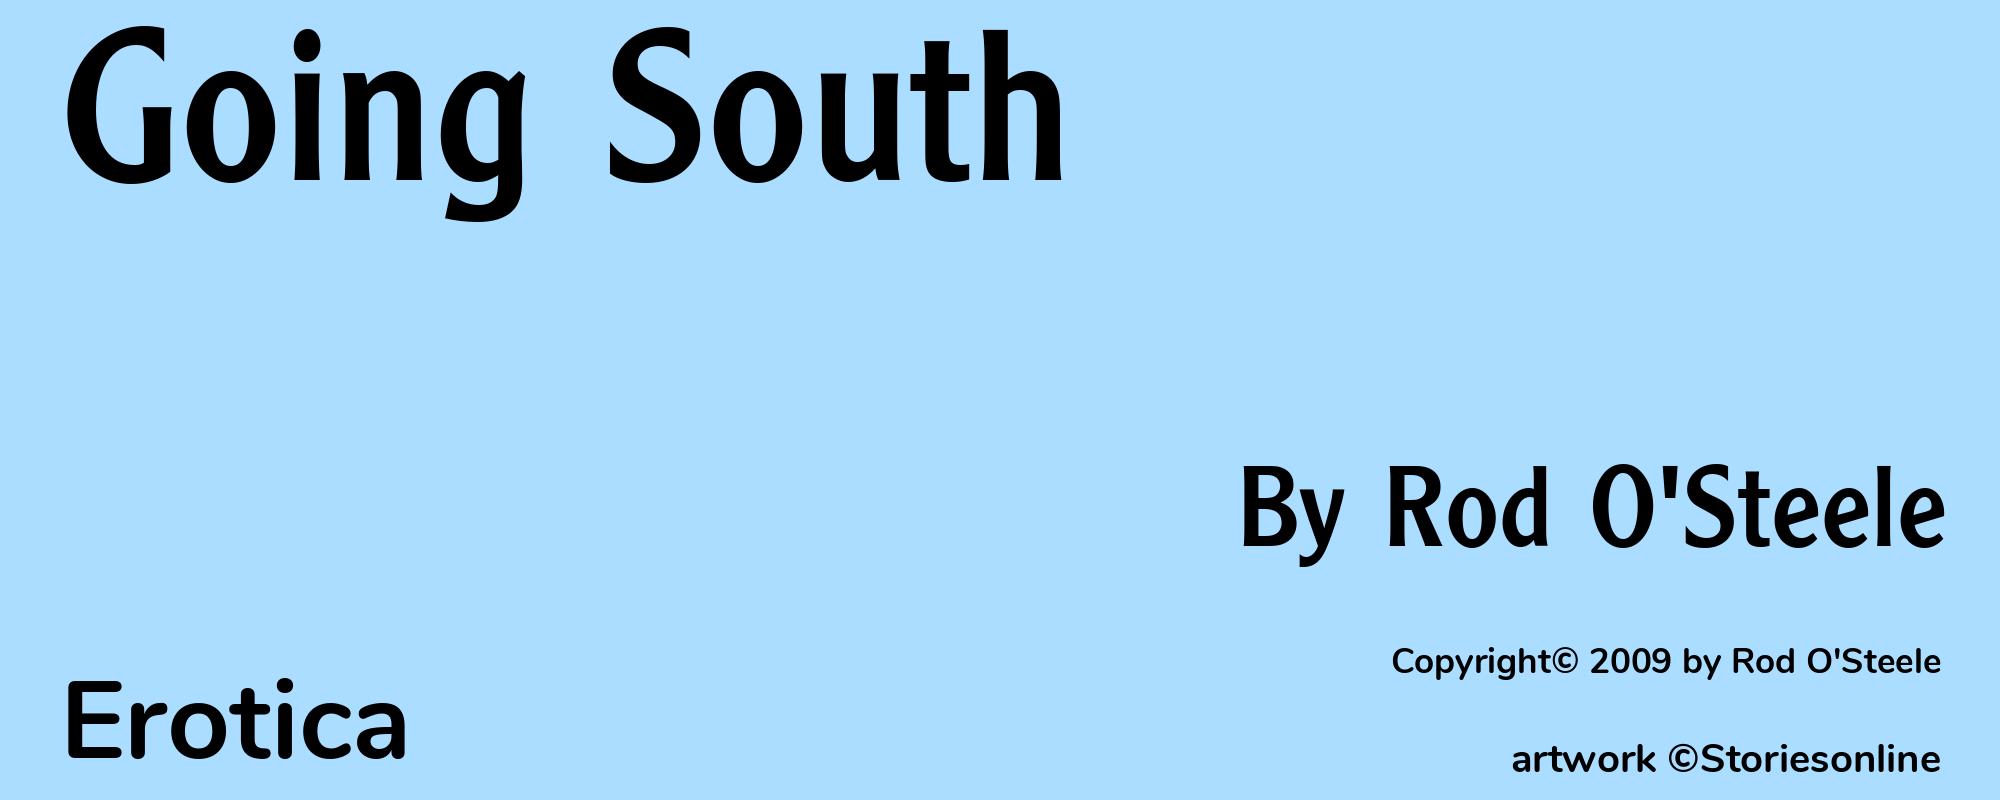 Going South - Cover